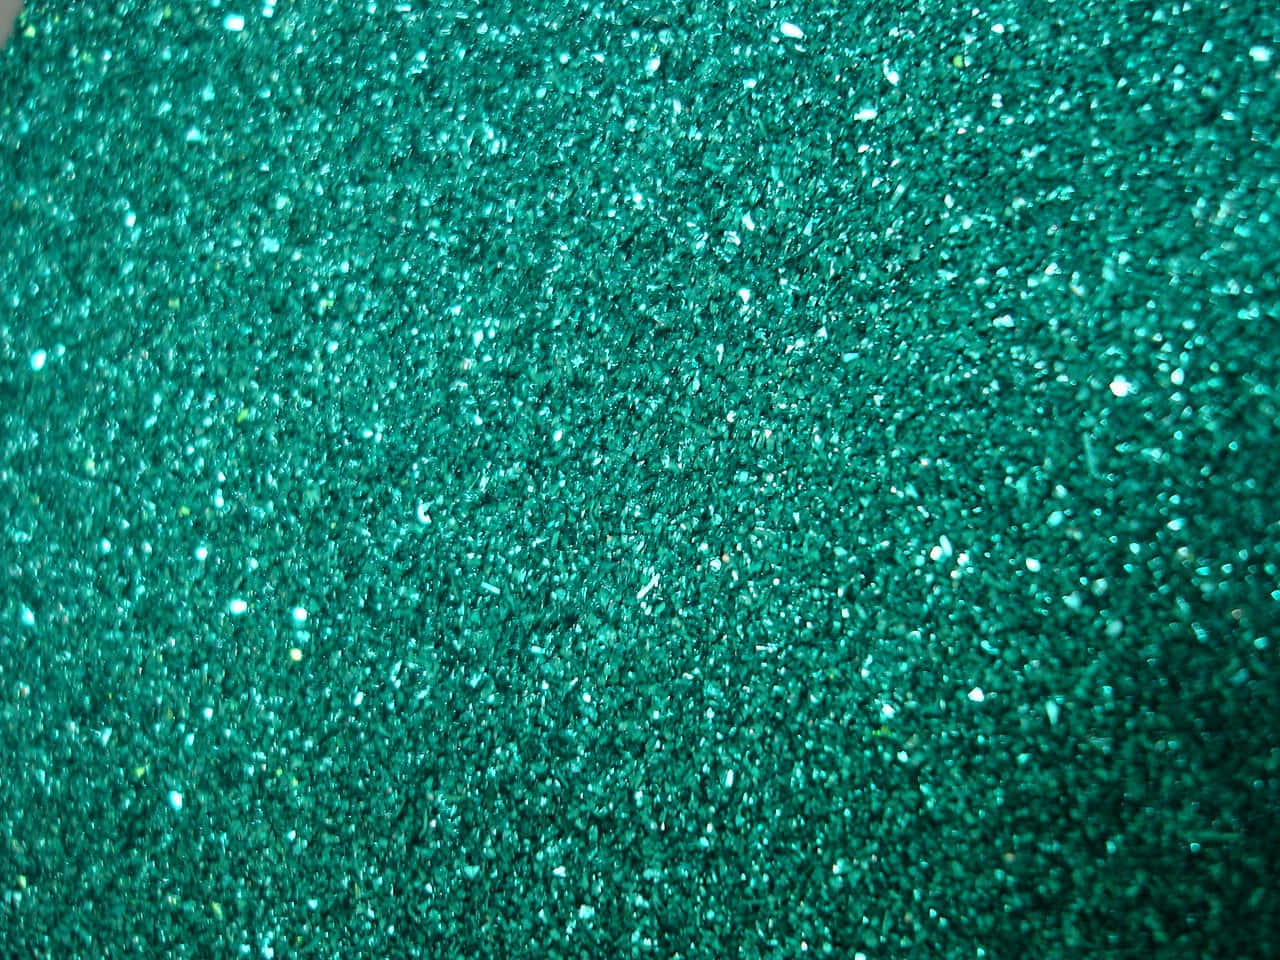 Shine bright with the iridescent sparkles of Teal Glitter